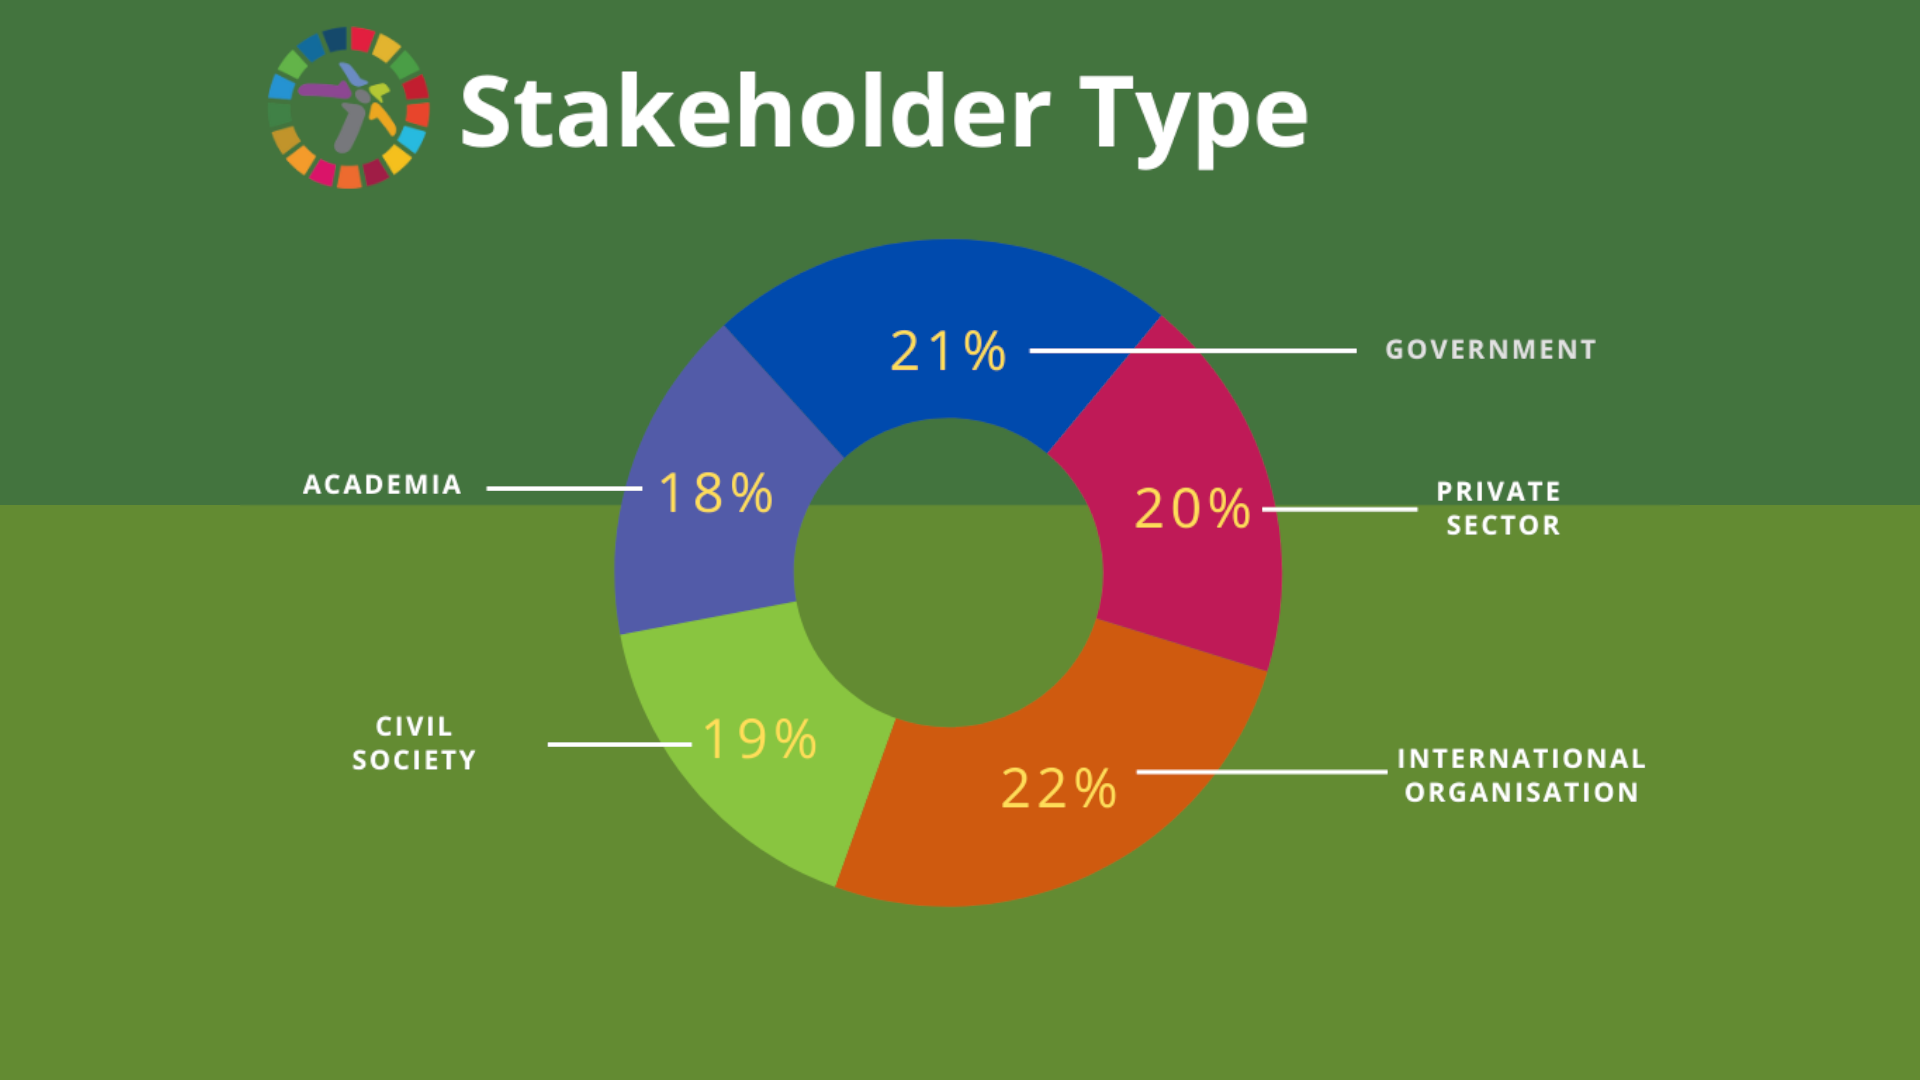 Submissions by Stakeholder Type